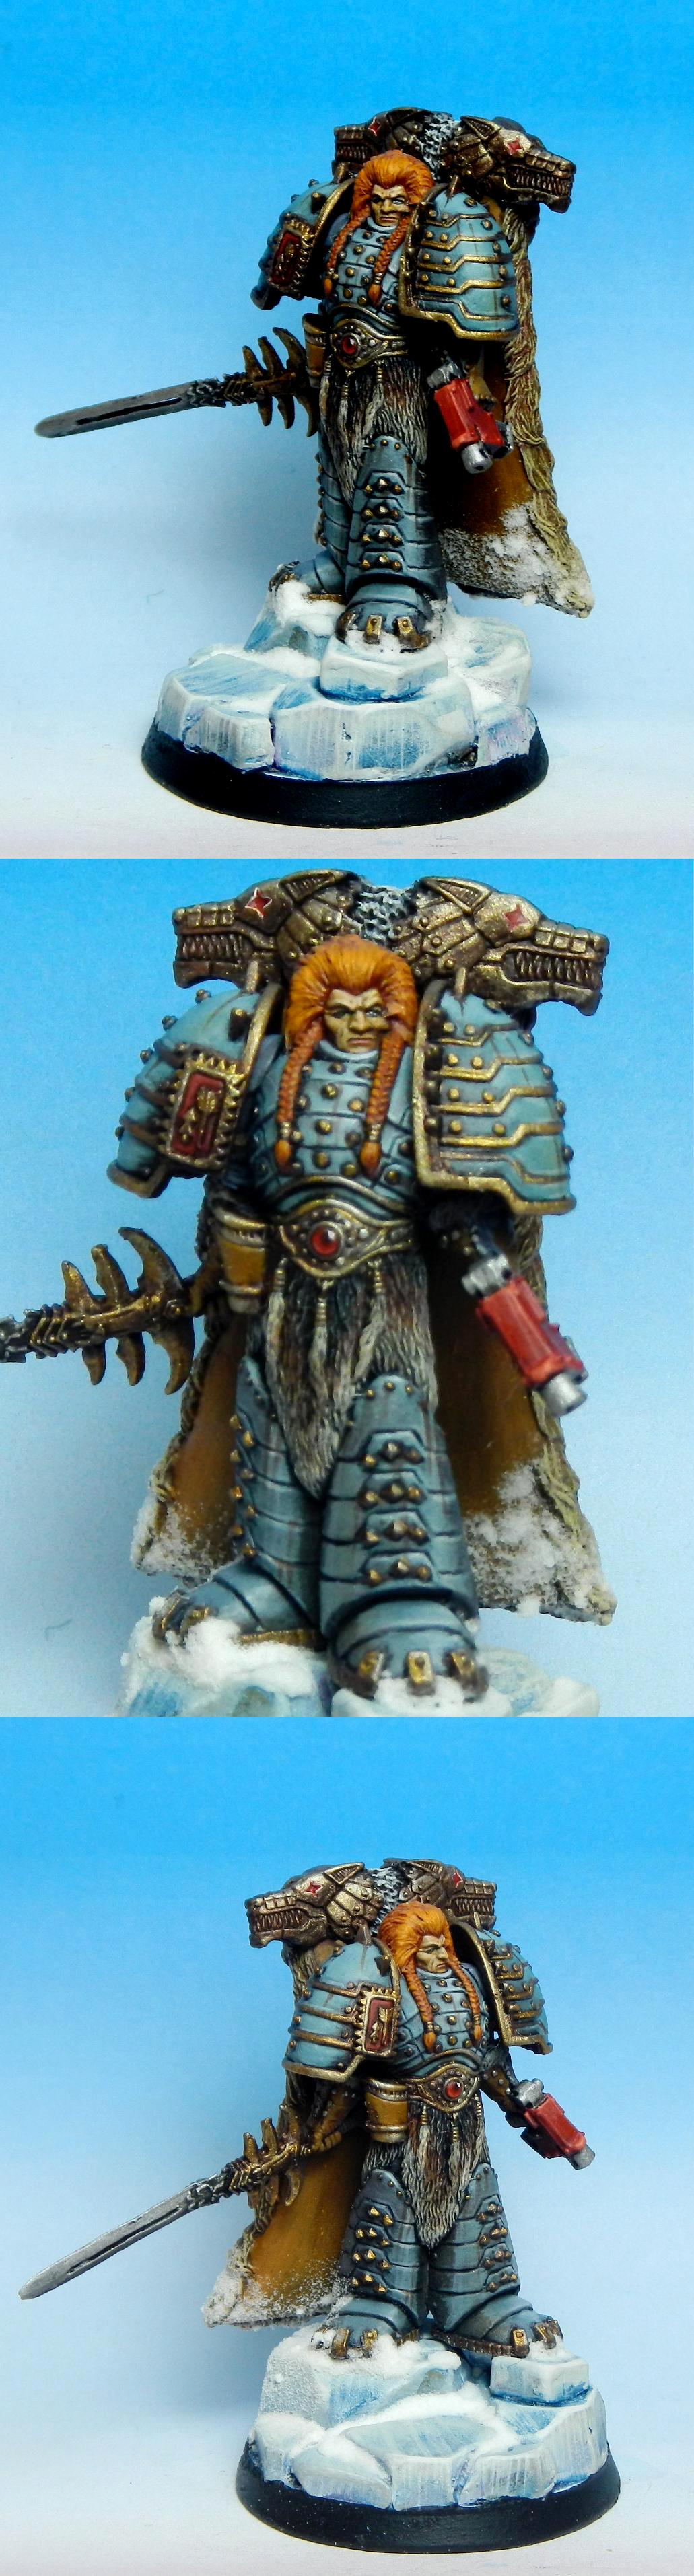 Horus Heresy, Leman Russ, Primarch, Space Wolves, The Horus Heresy